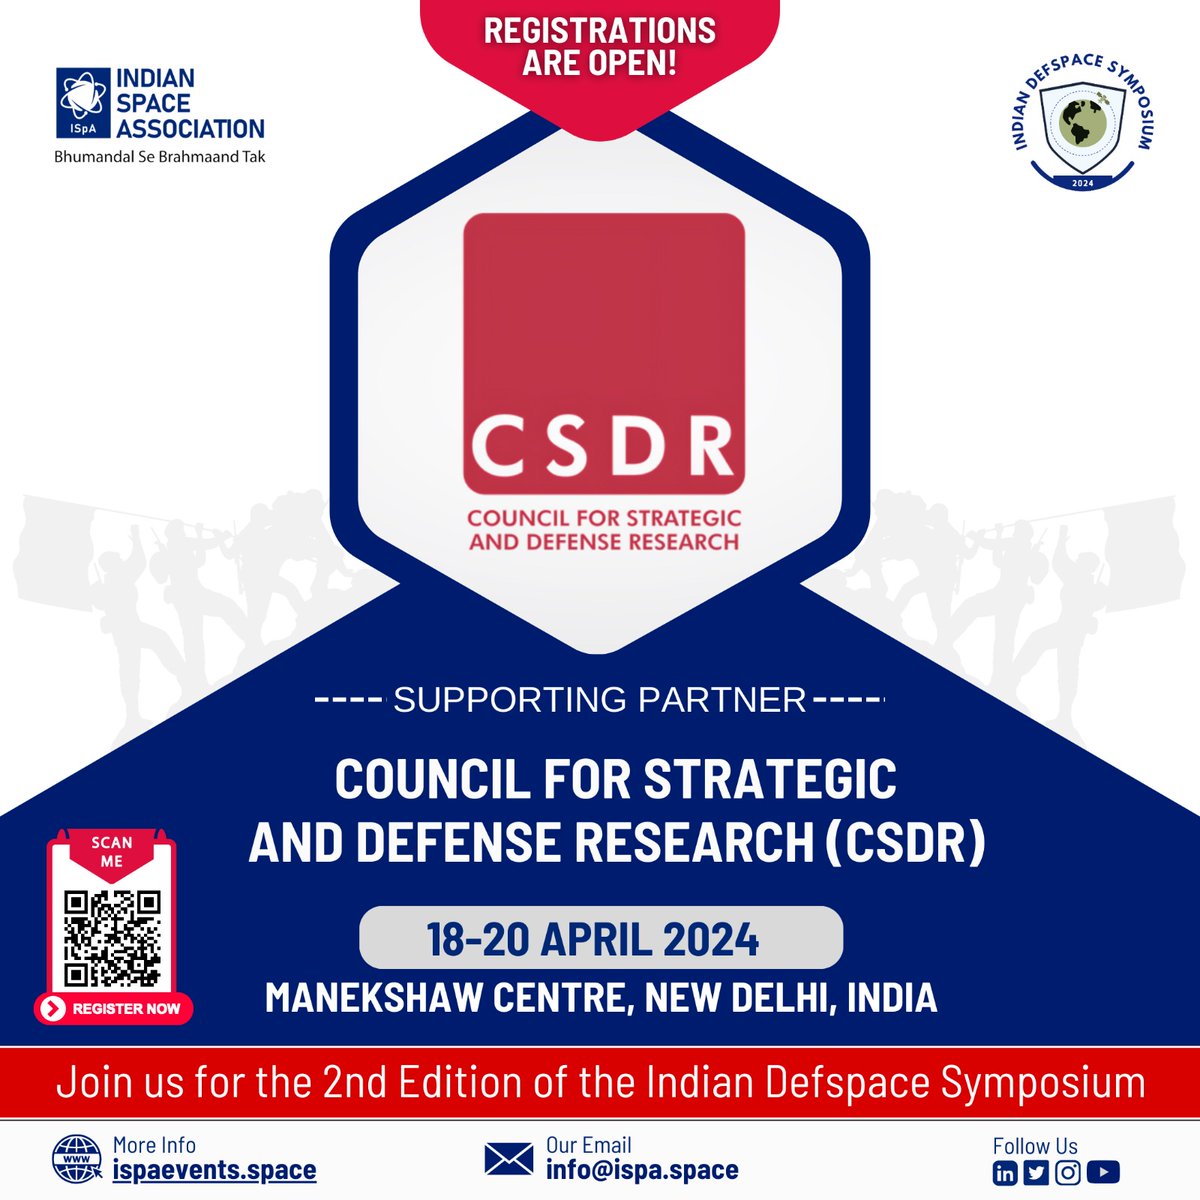 ISpA- Indian Space Association Welcome @CSDR_India as a supporting partner for the Indian DefSpace Symposium 2024, 18-20 April, Manekshaw Centre, New Delhi, India. For registration, Scan the QR code or visit ispaevents.space.